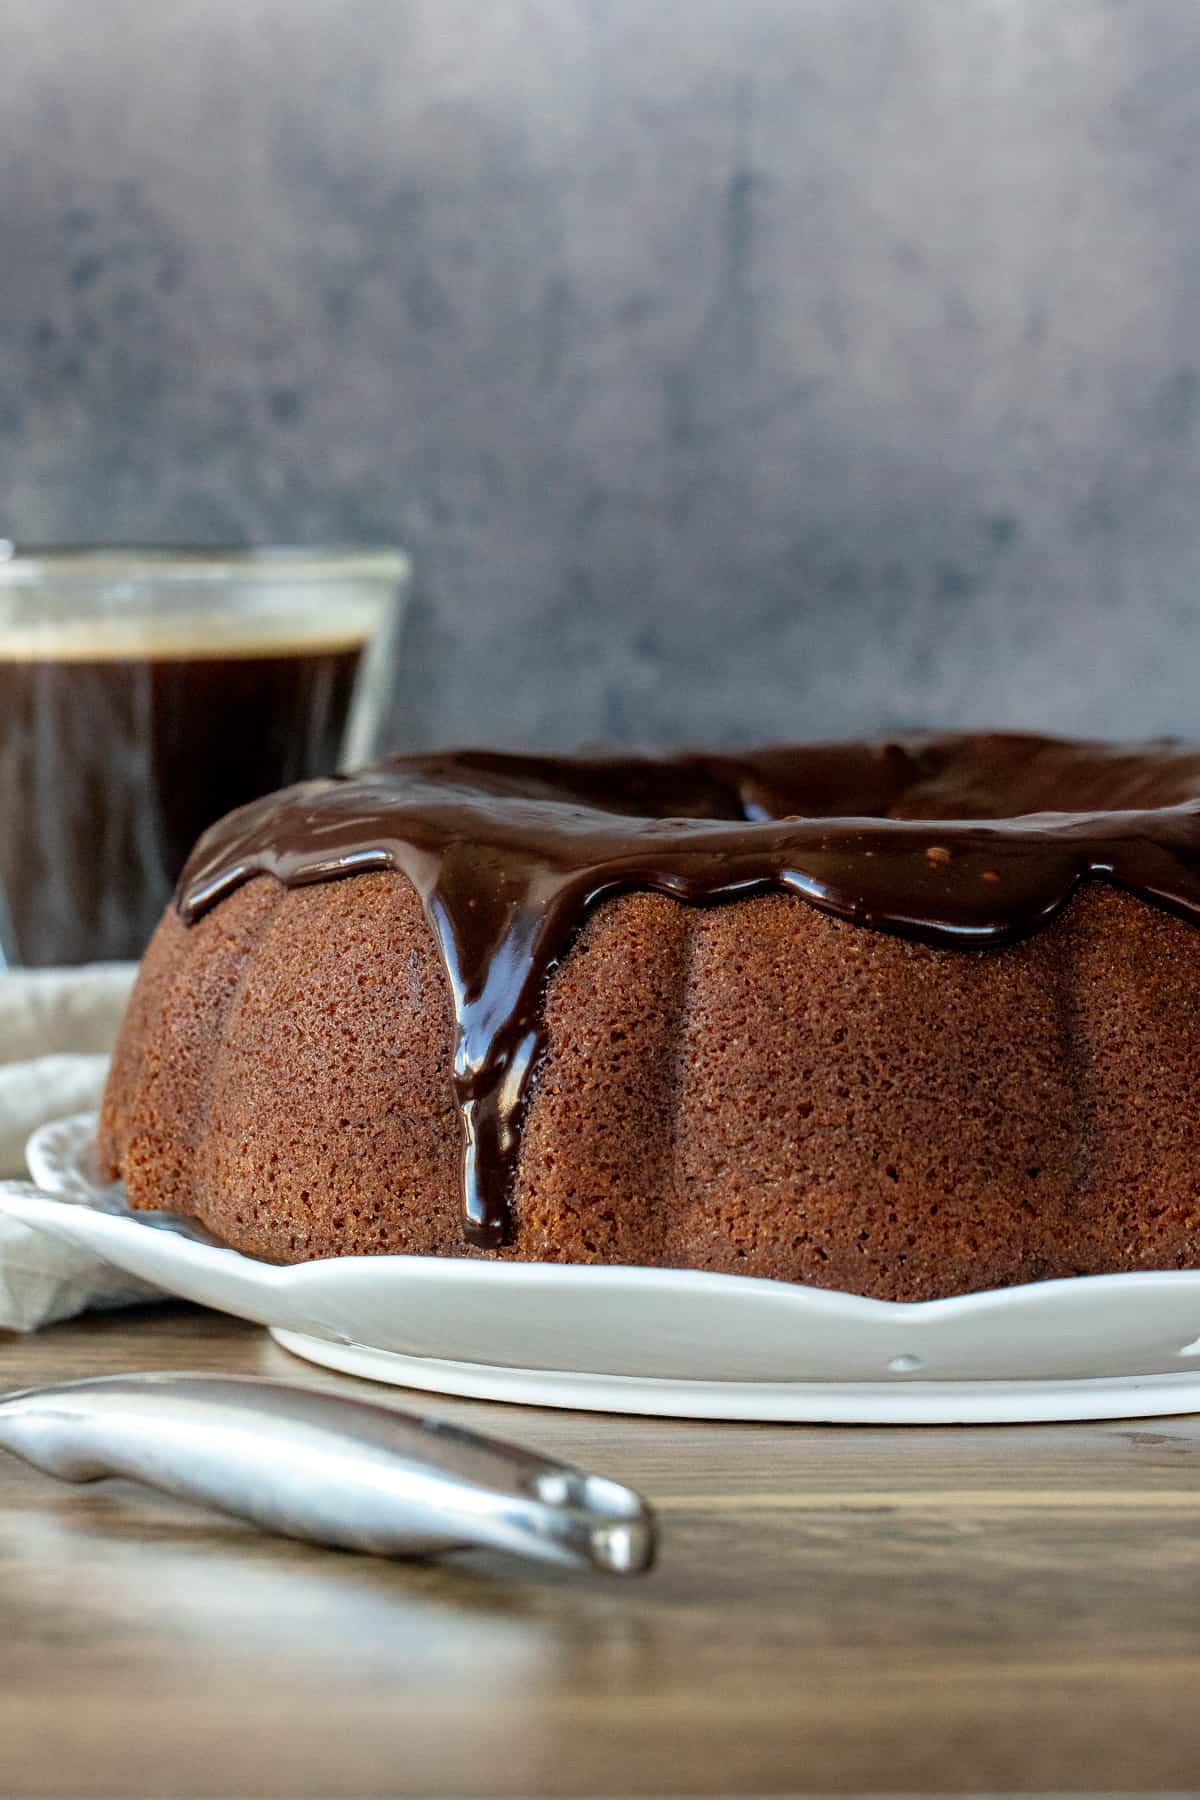 Coffee flavored bundt cake topped with chocolate ganache